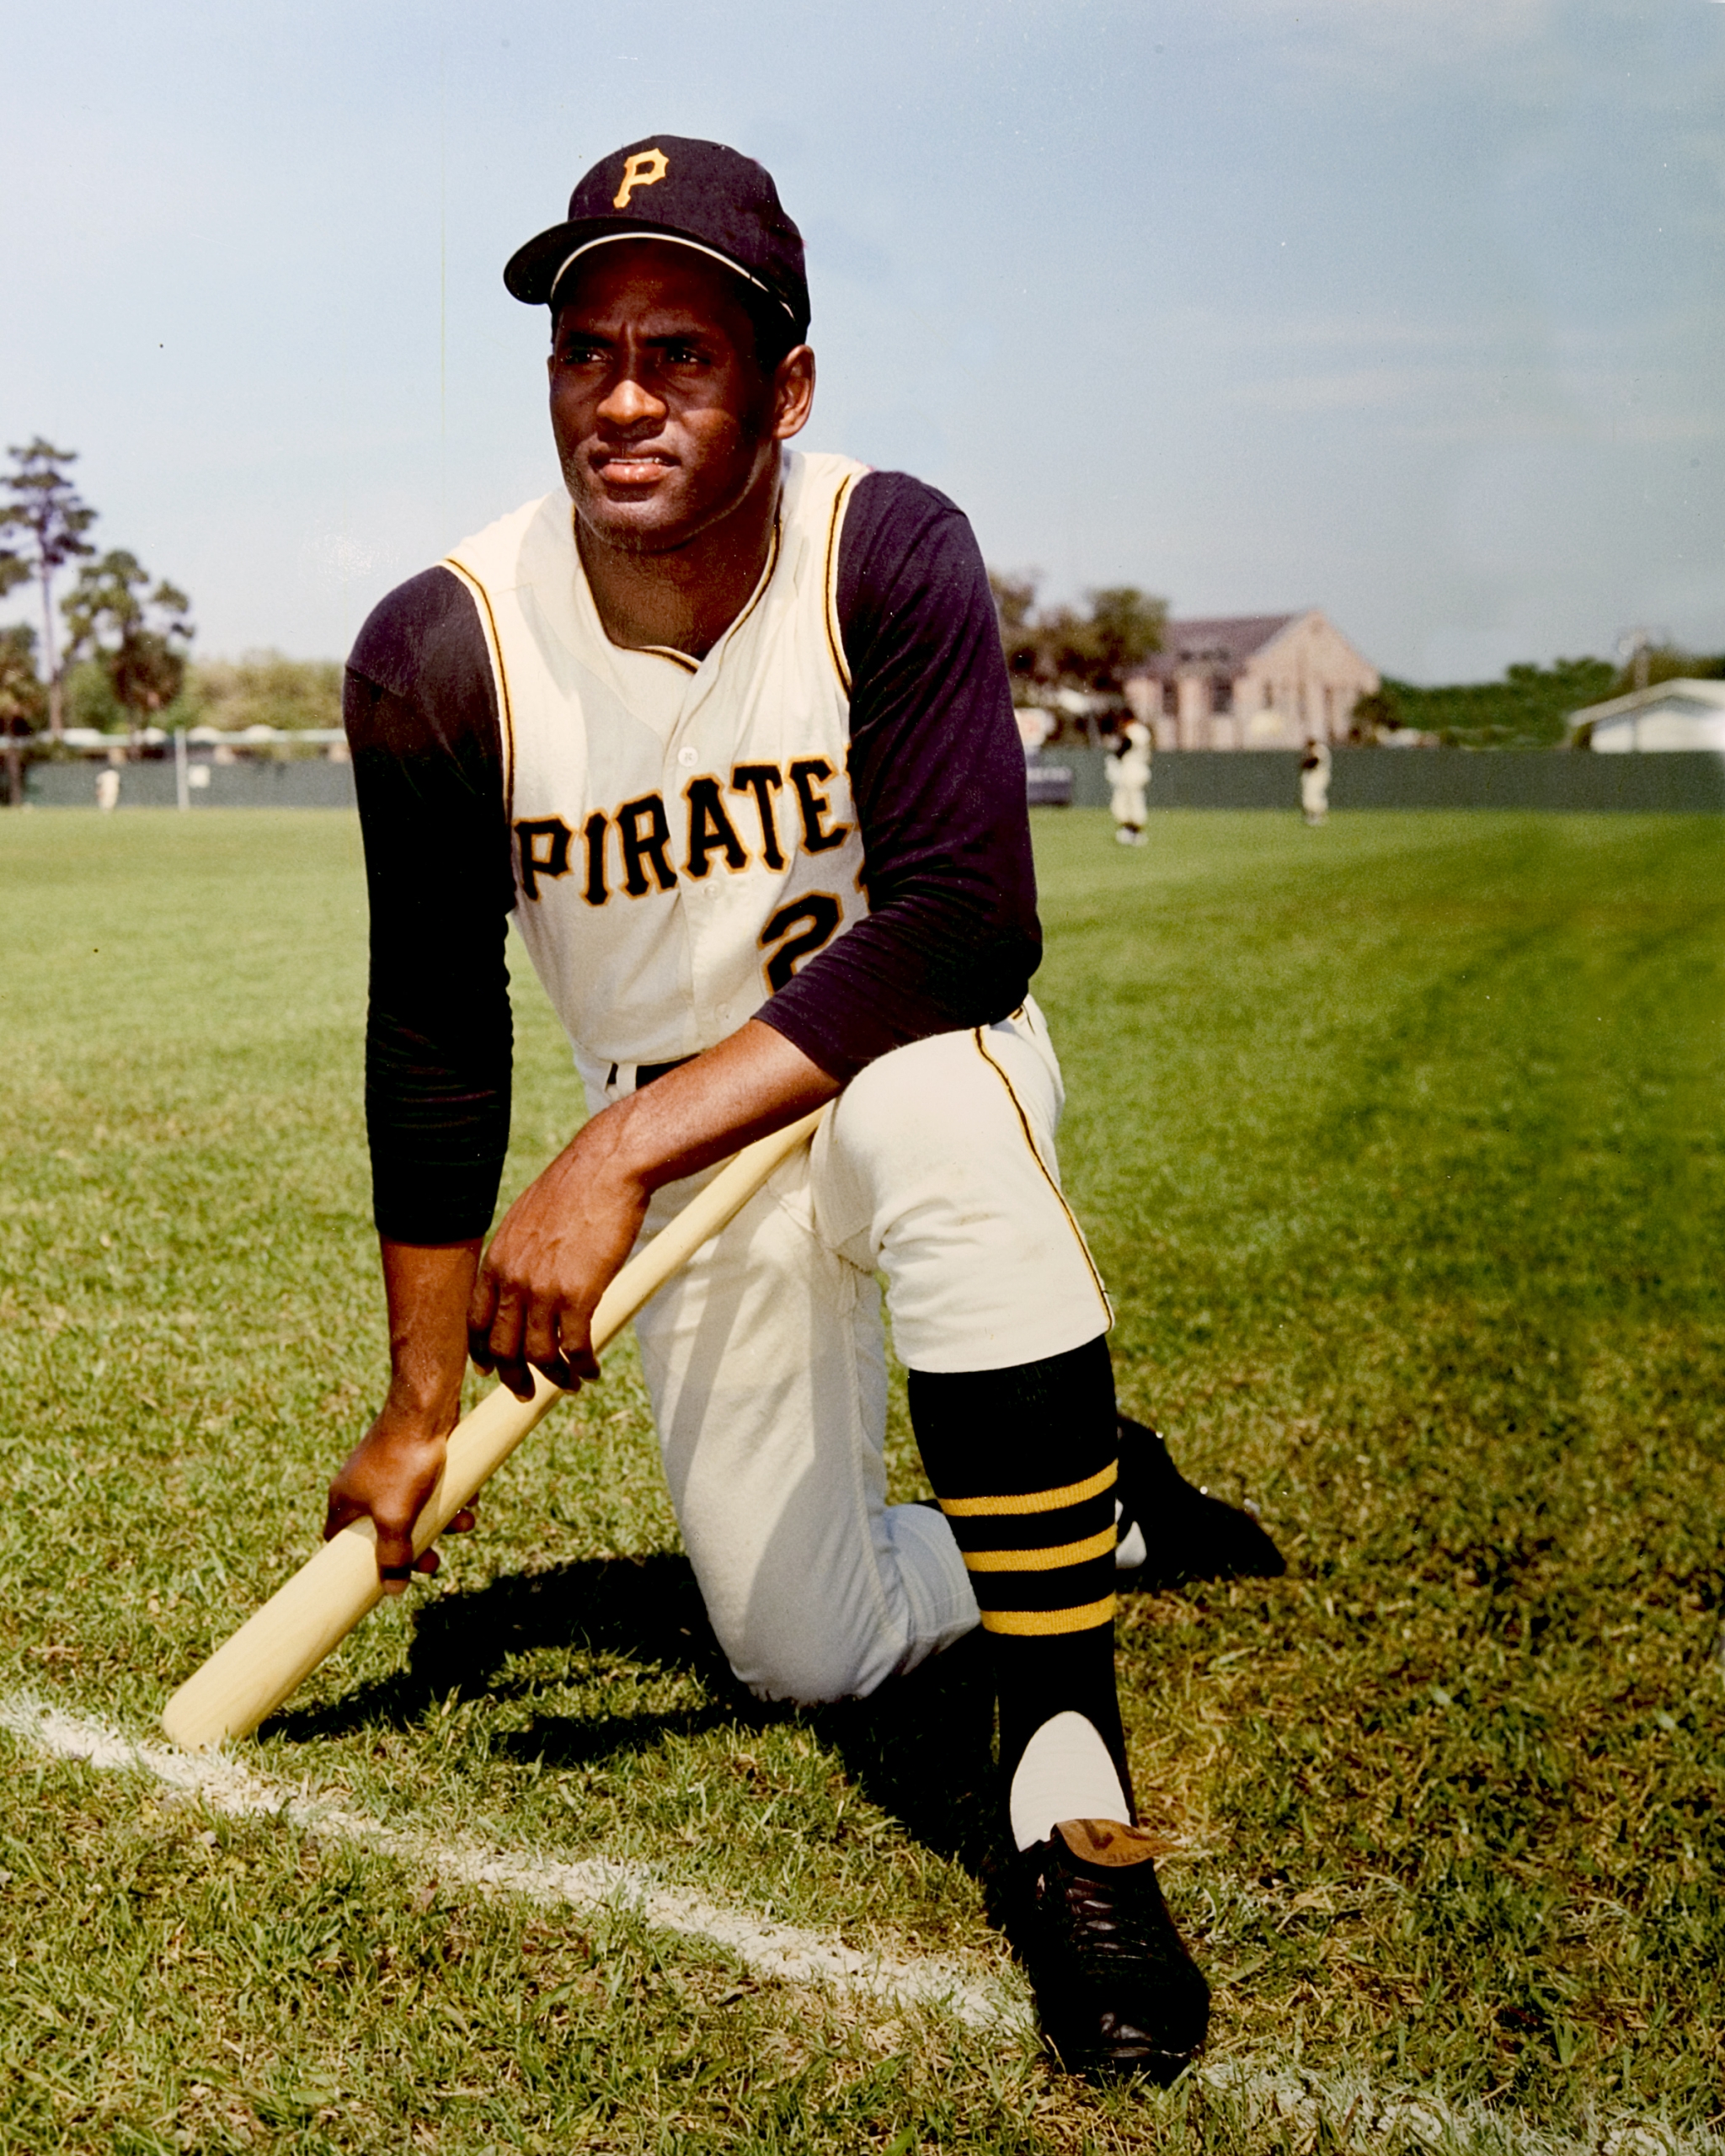 Roberto Clemente's destiny was shaped as a youngster in Puerto Rico